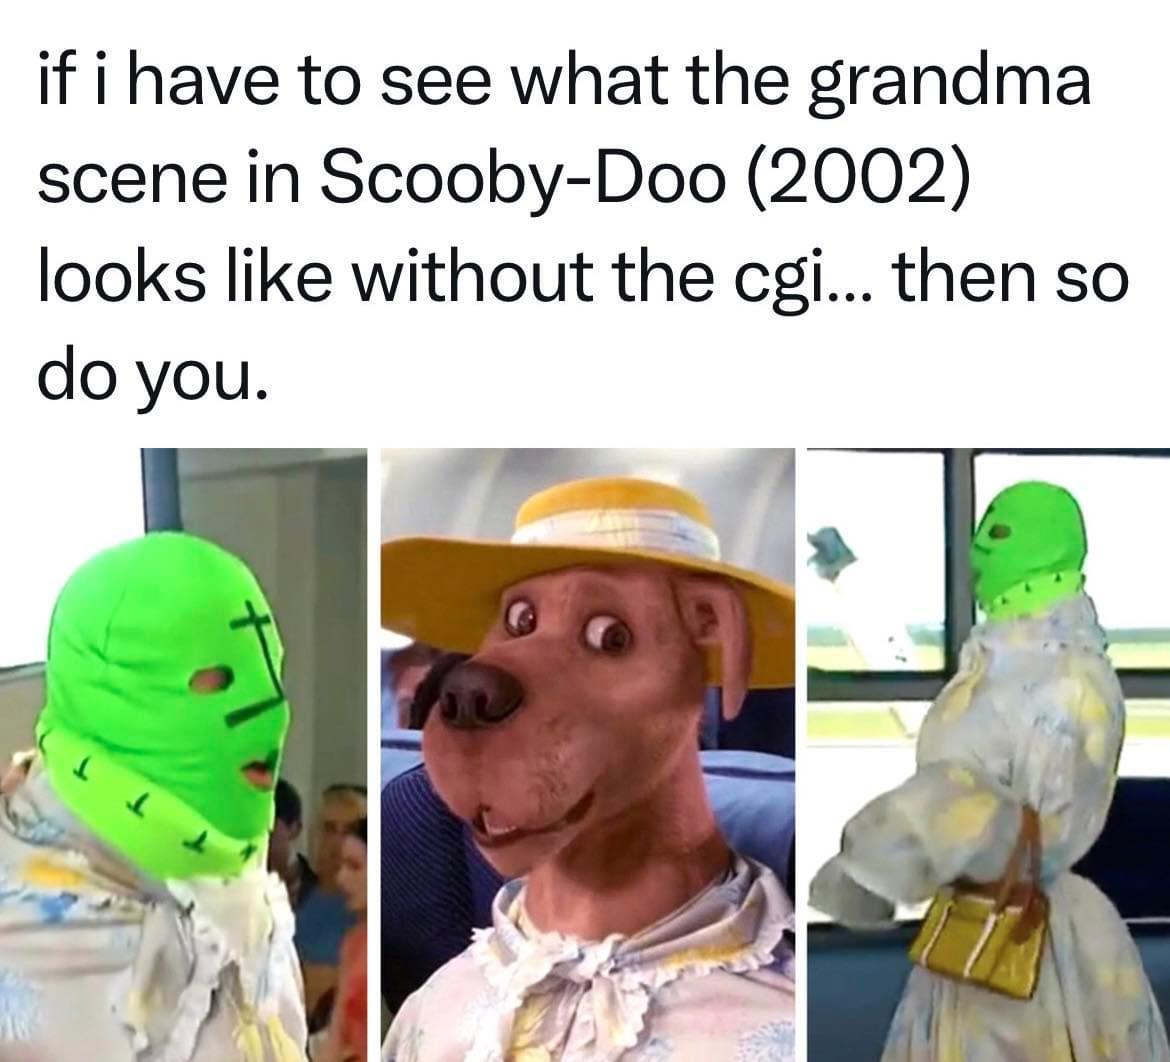 human behavior - if i have to see what the grandma scene in ScoobyDoo 2002 looks without the cgi... then so do you. 11 G